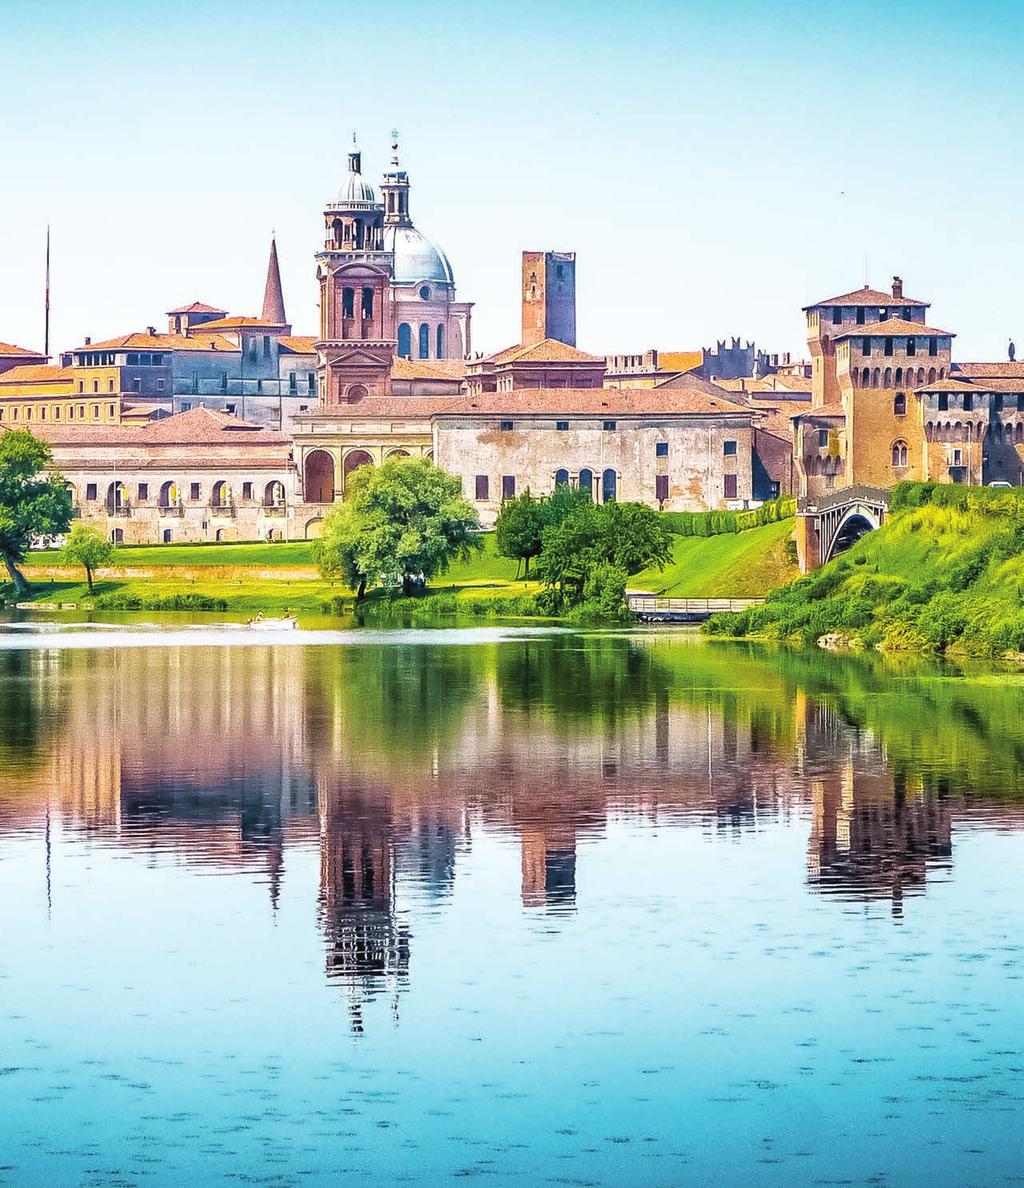 The historic city of Mantua in Lombardy.